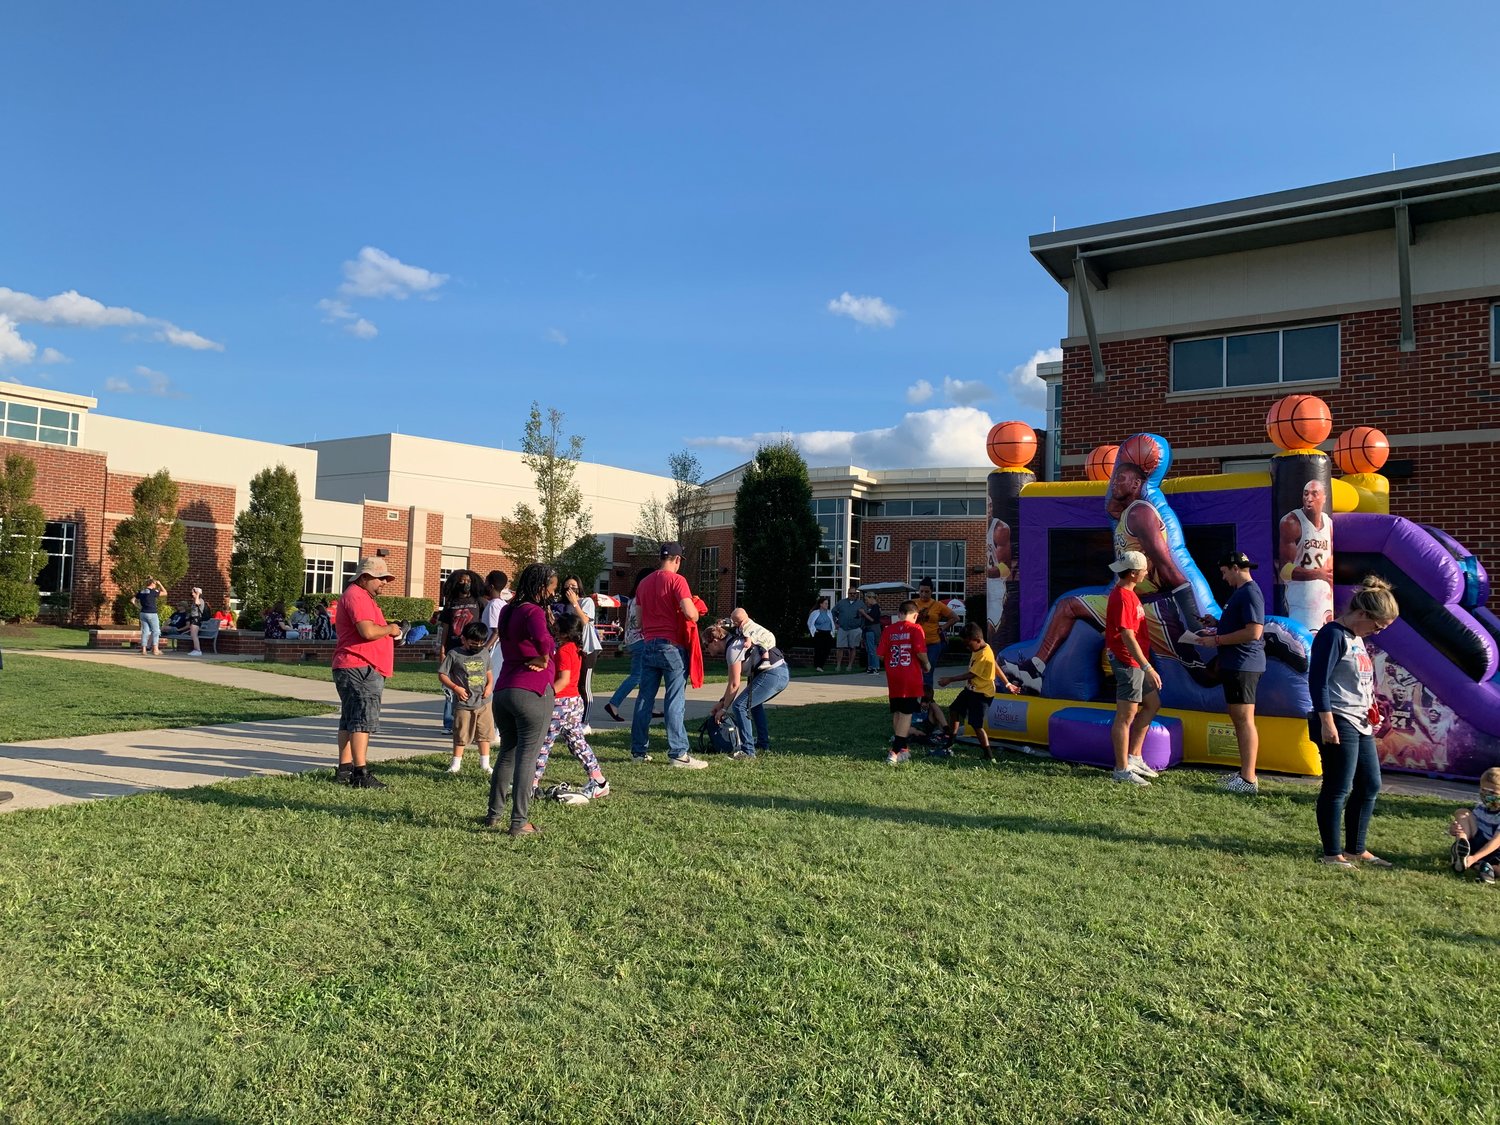 Children line up for several bounce house. Students organized lines while Leadership Development Teachers Sharon Shipman oversaw.